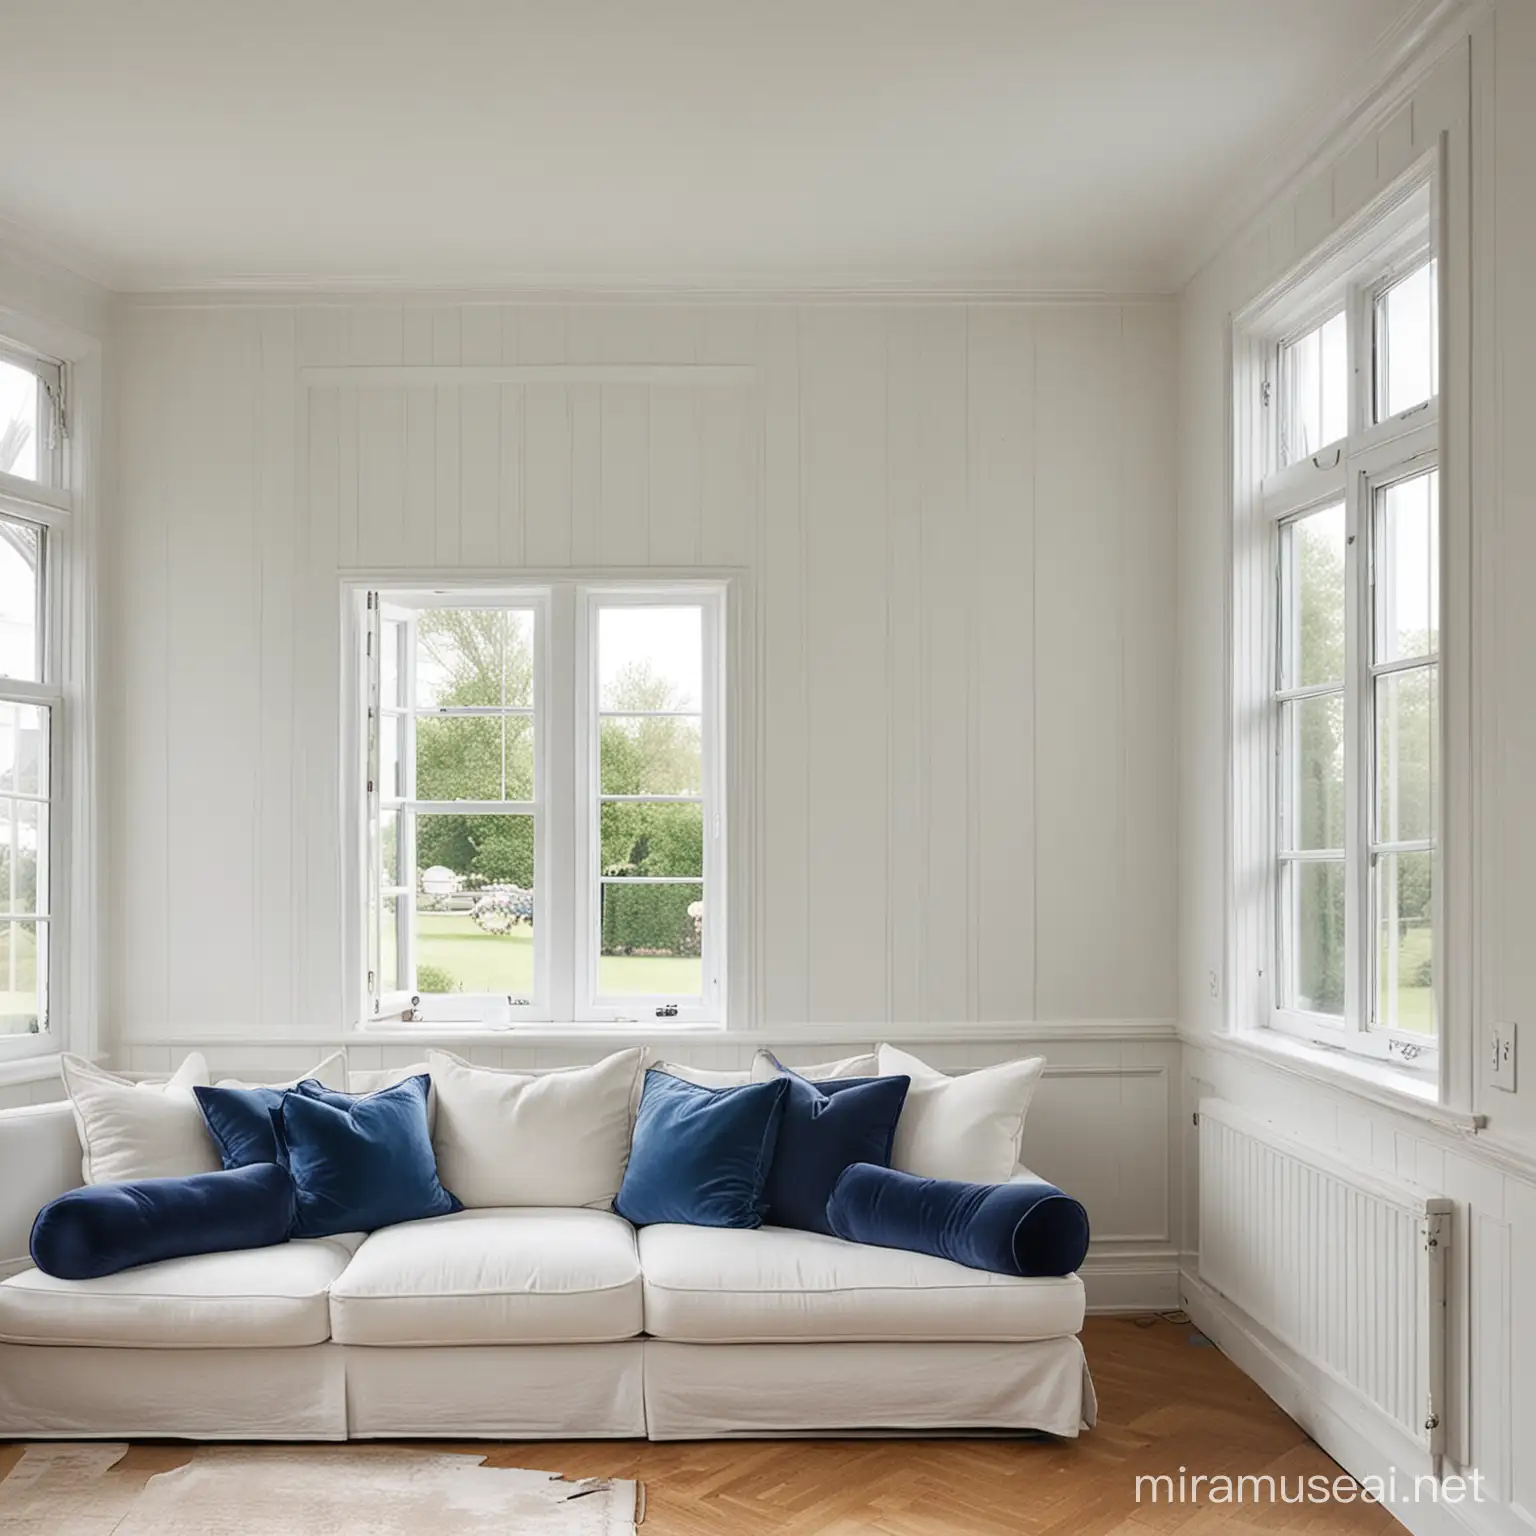 looking into the corner of a living room. large plain white panelled walls. sofa with blue pillows. window to left.